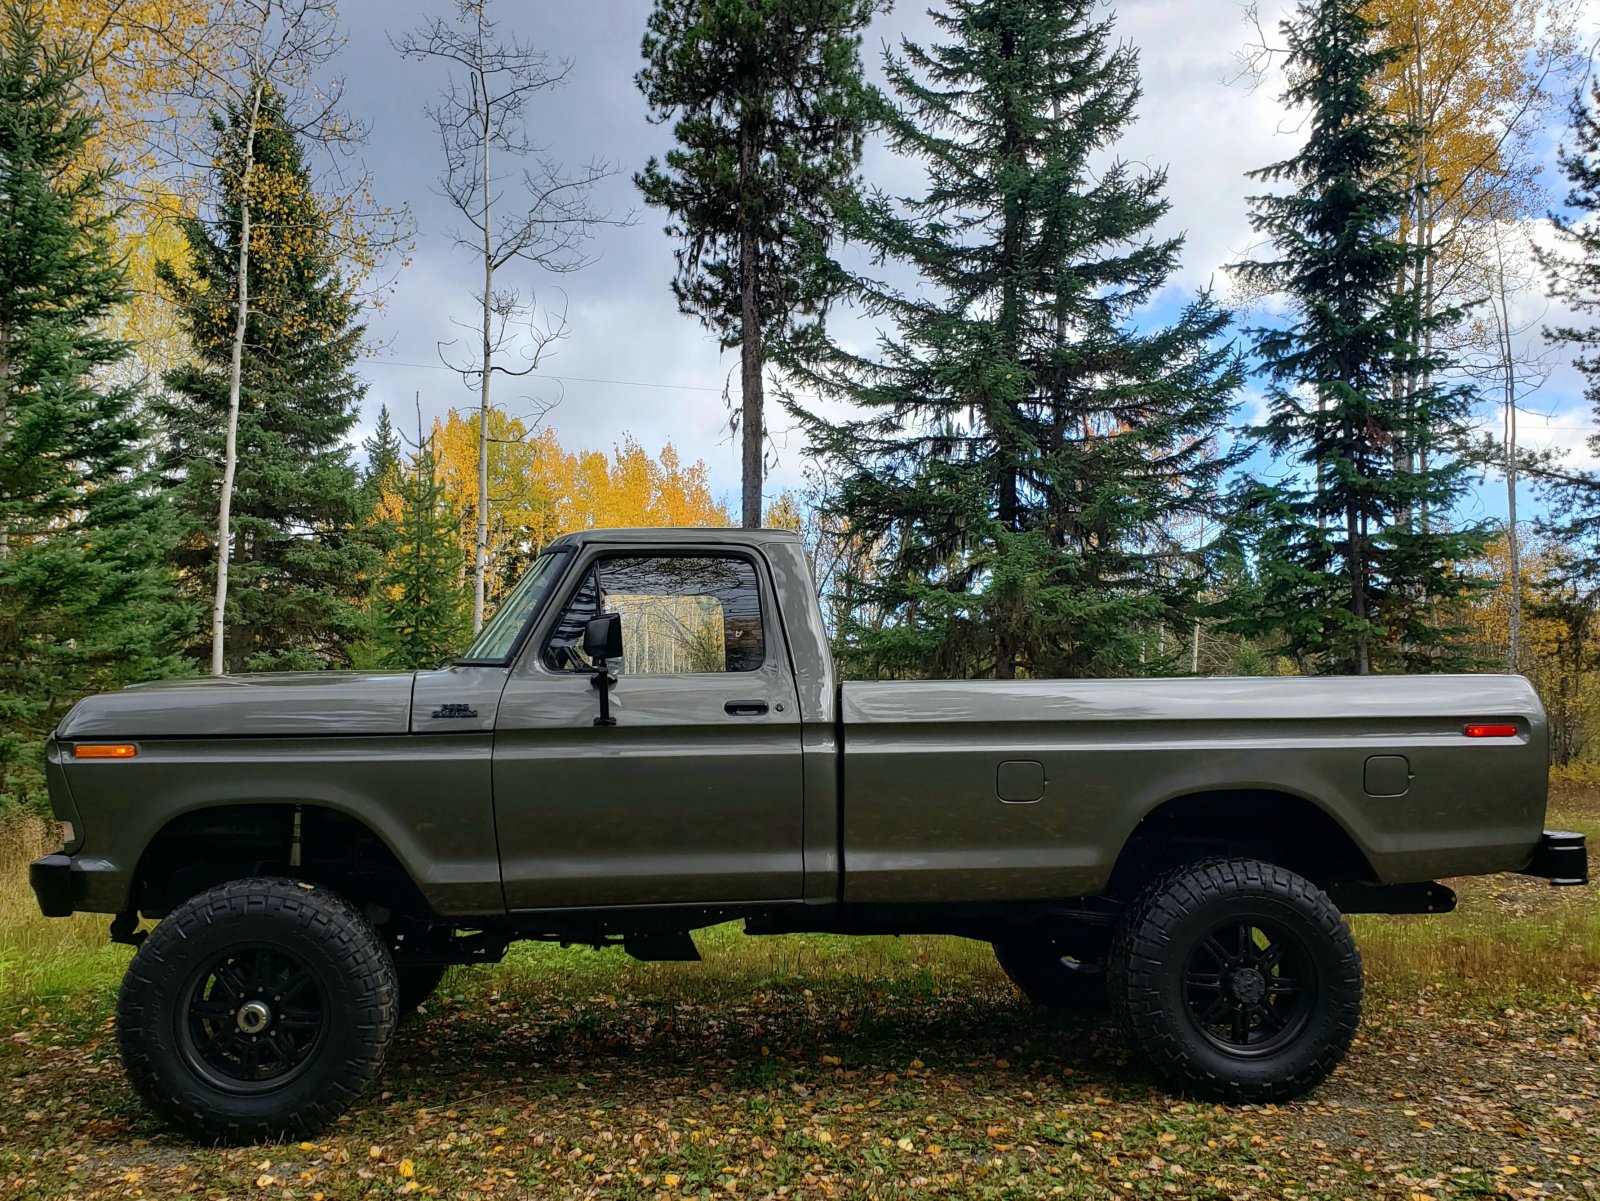 The Story Of Grandpa's Old Truck Turned Into a Fully Restored Diesel Dentside 4.jpg